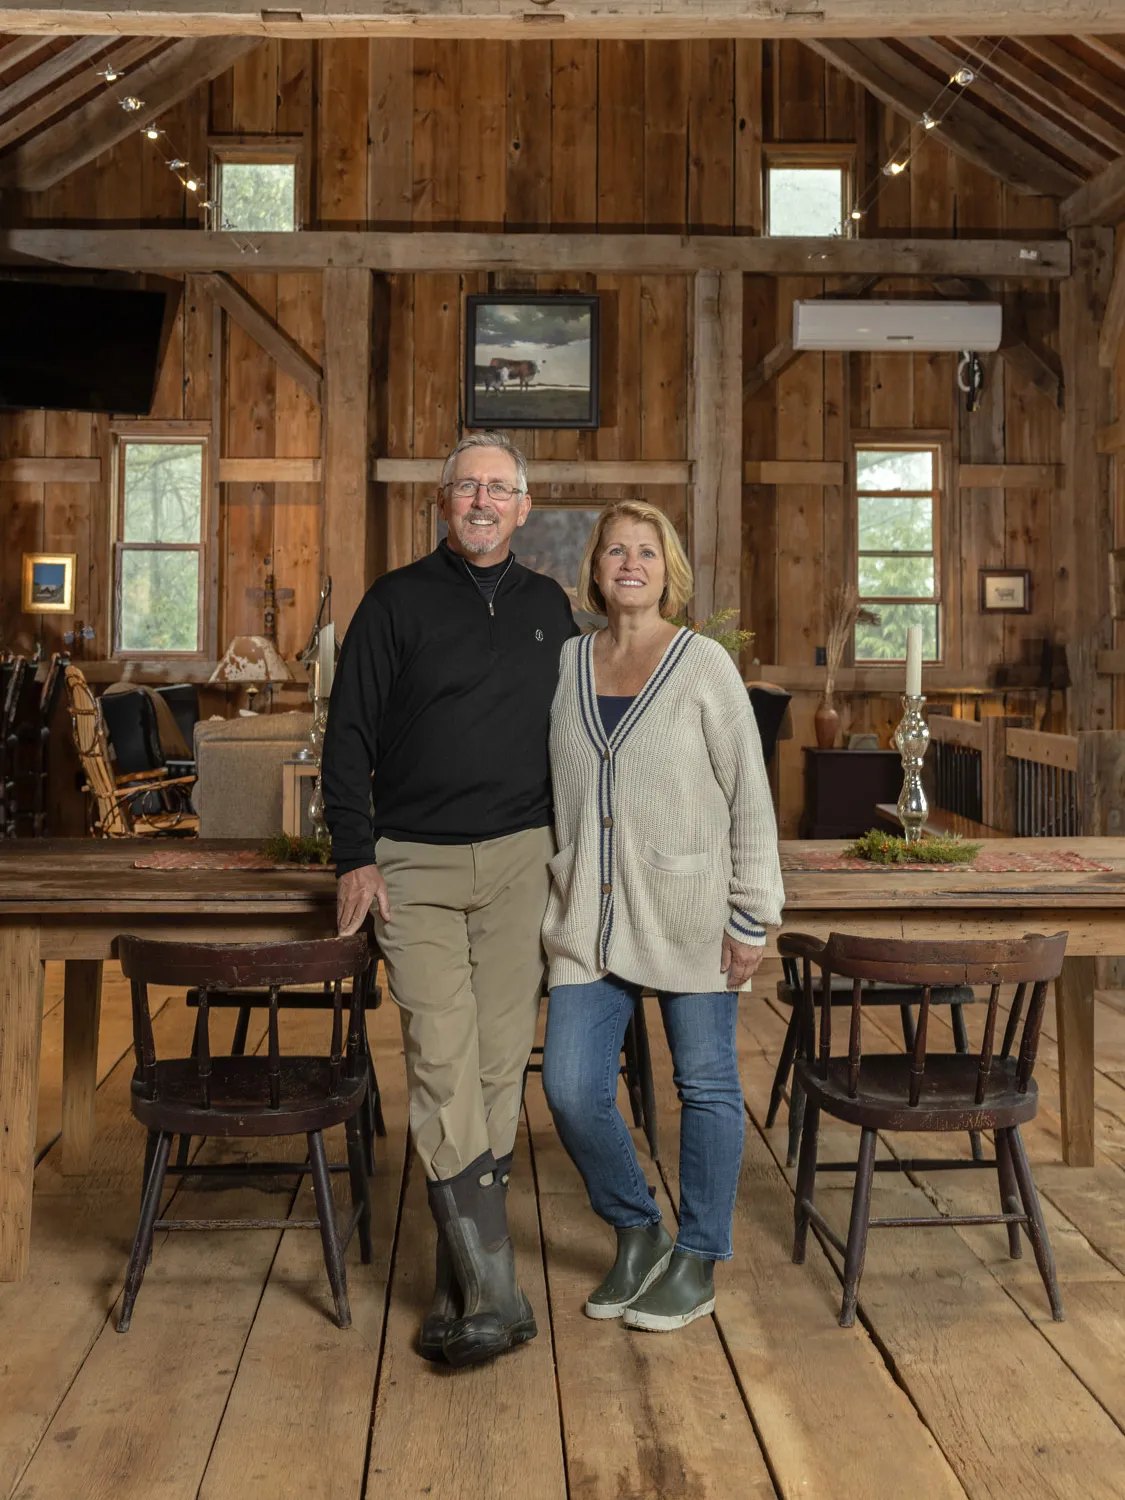 Standing inside a restored barn, a middle-aged couple wrap their arms around each other and smile for the camera. The structure, which peaks high above their heads, is made completely of wide planks of seemingly high quality lumber. There are paintings on the walls, windows and a couple of fancy, tall candle sticks and holders, giving an impression of upscale country. 